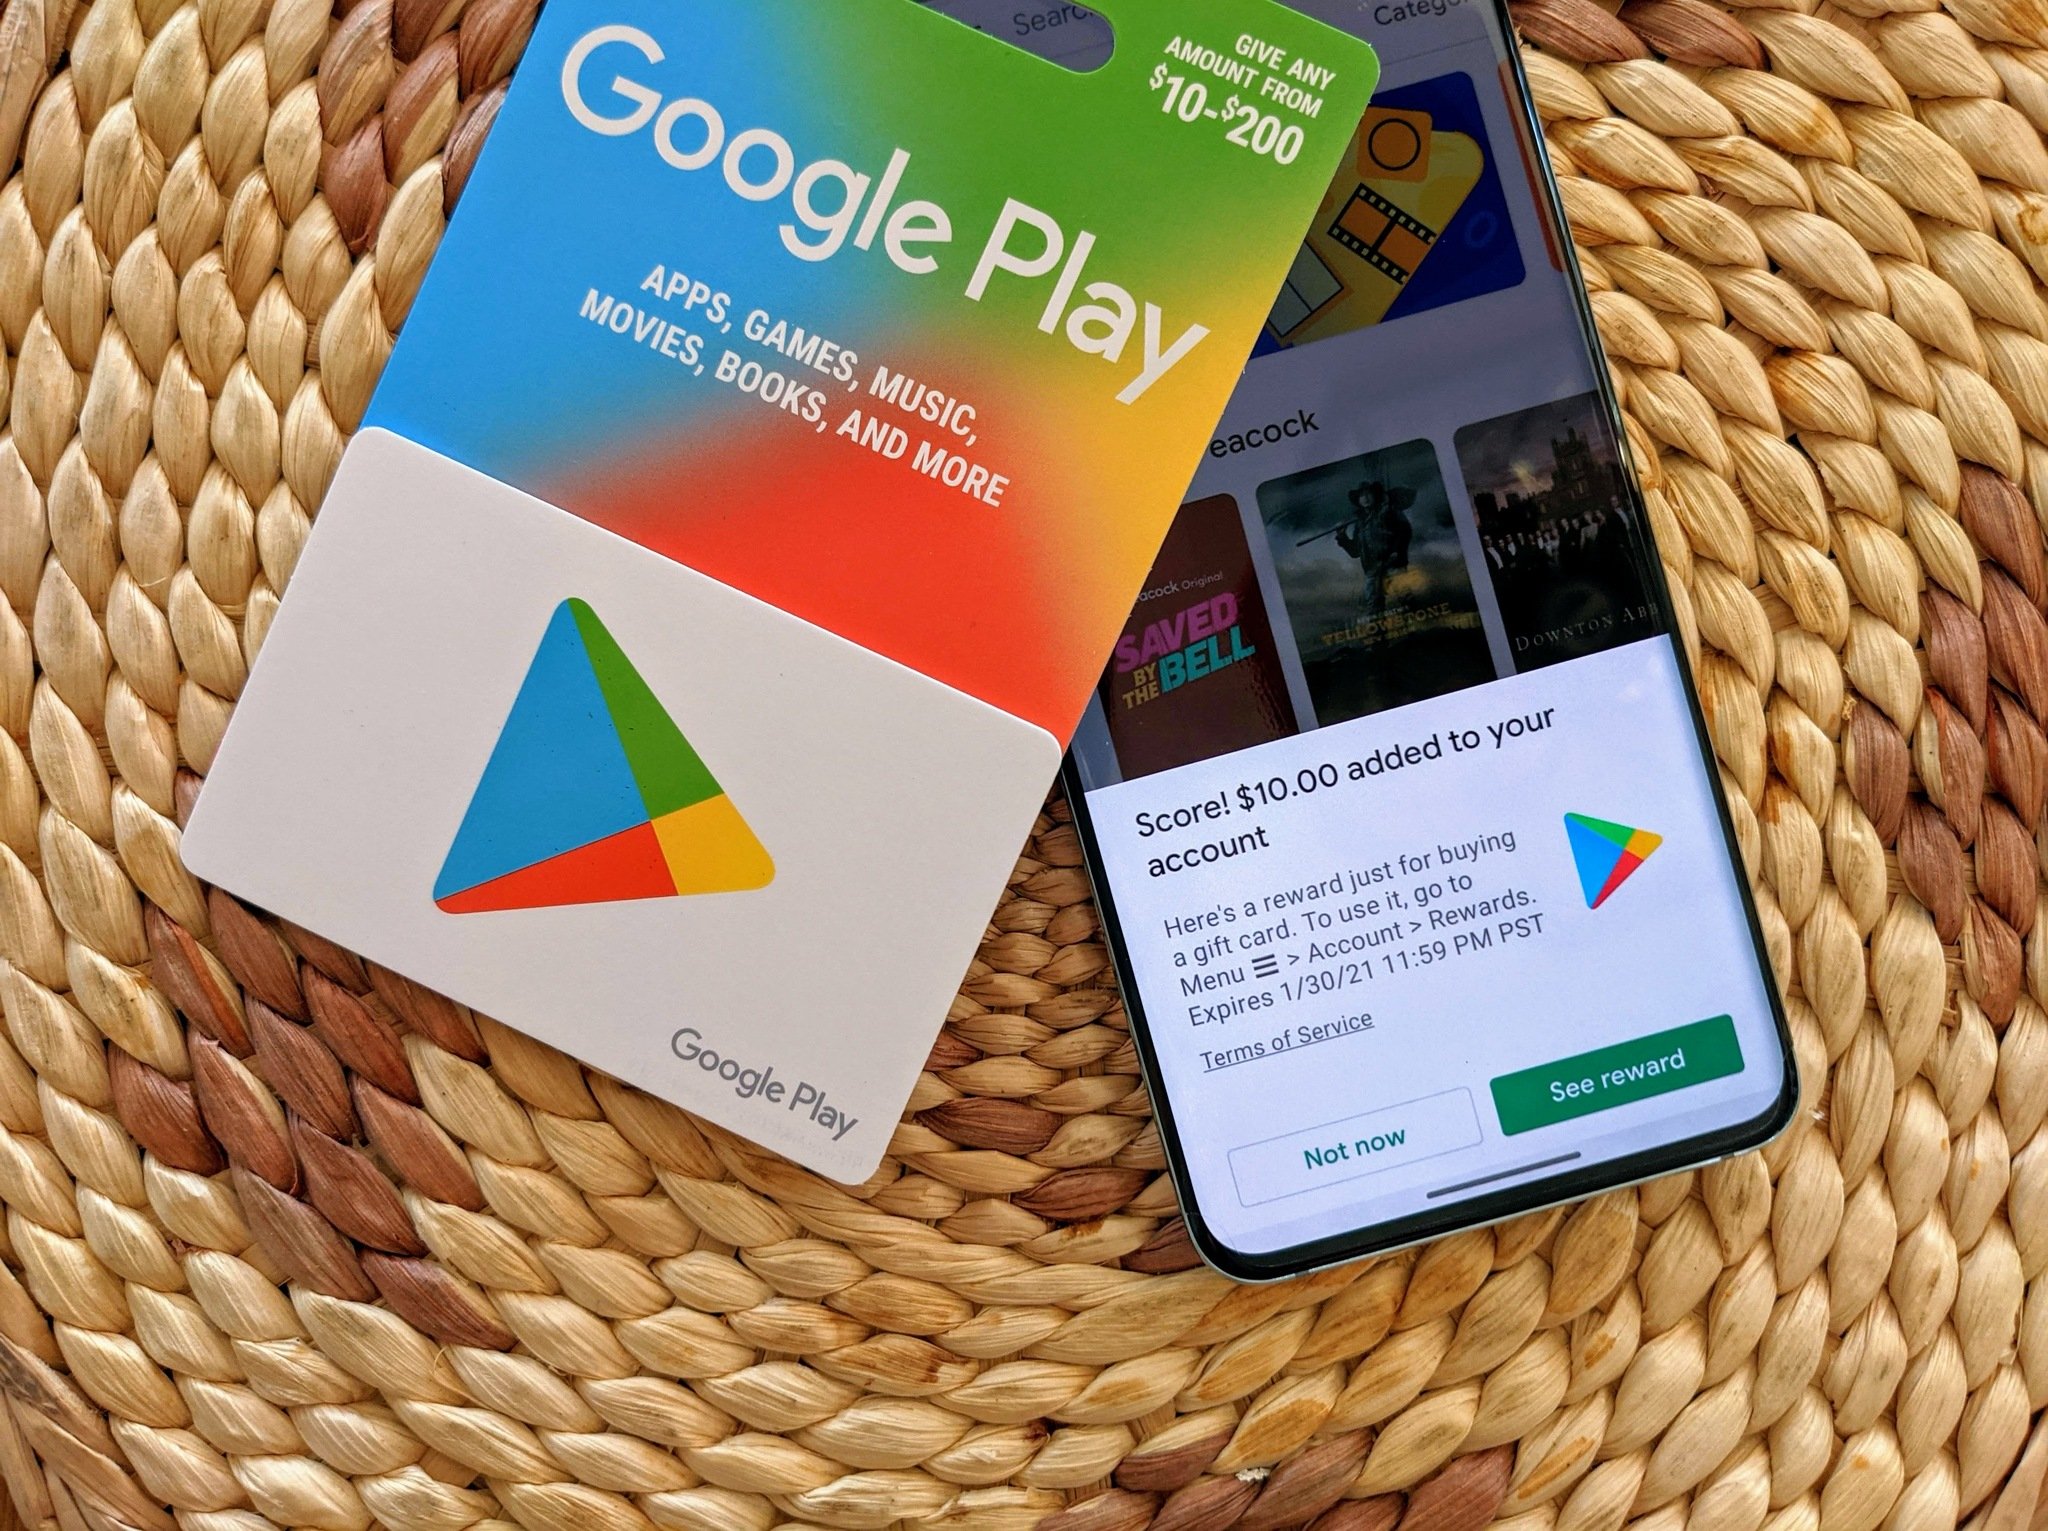 What Can You Do With Google Play Gift Cards?